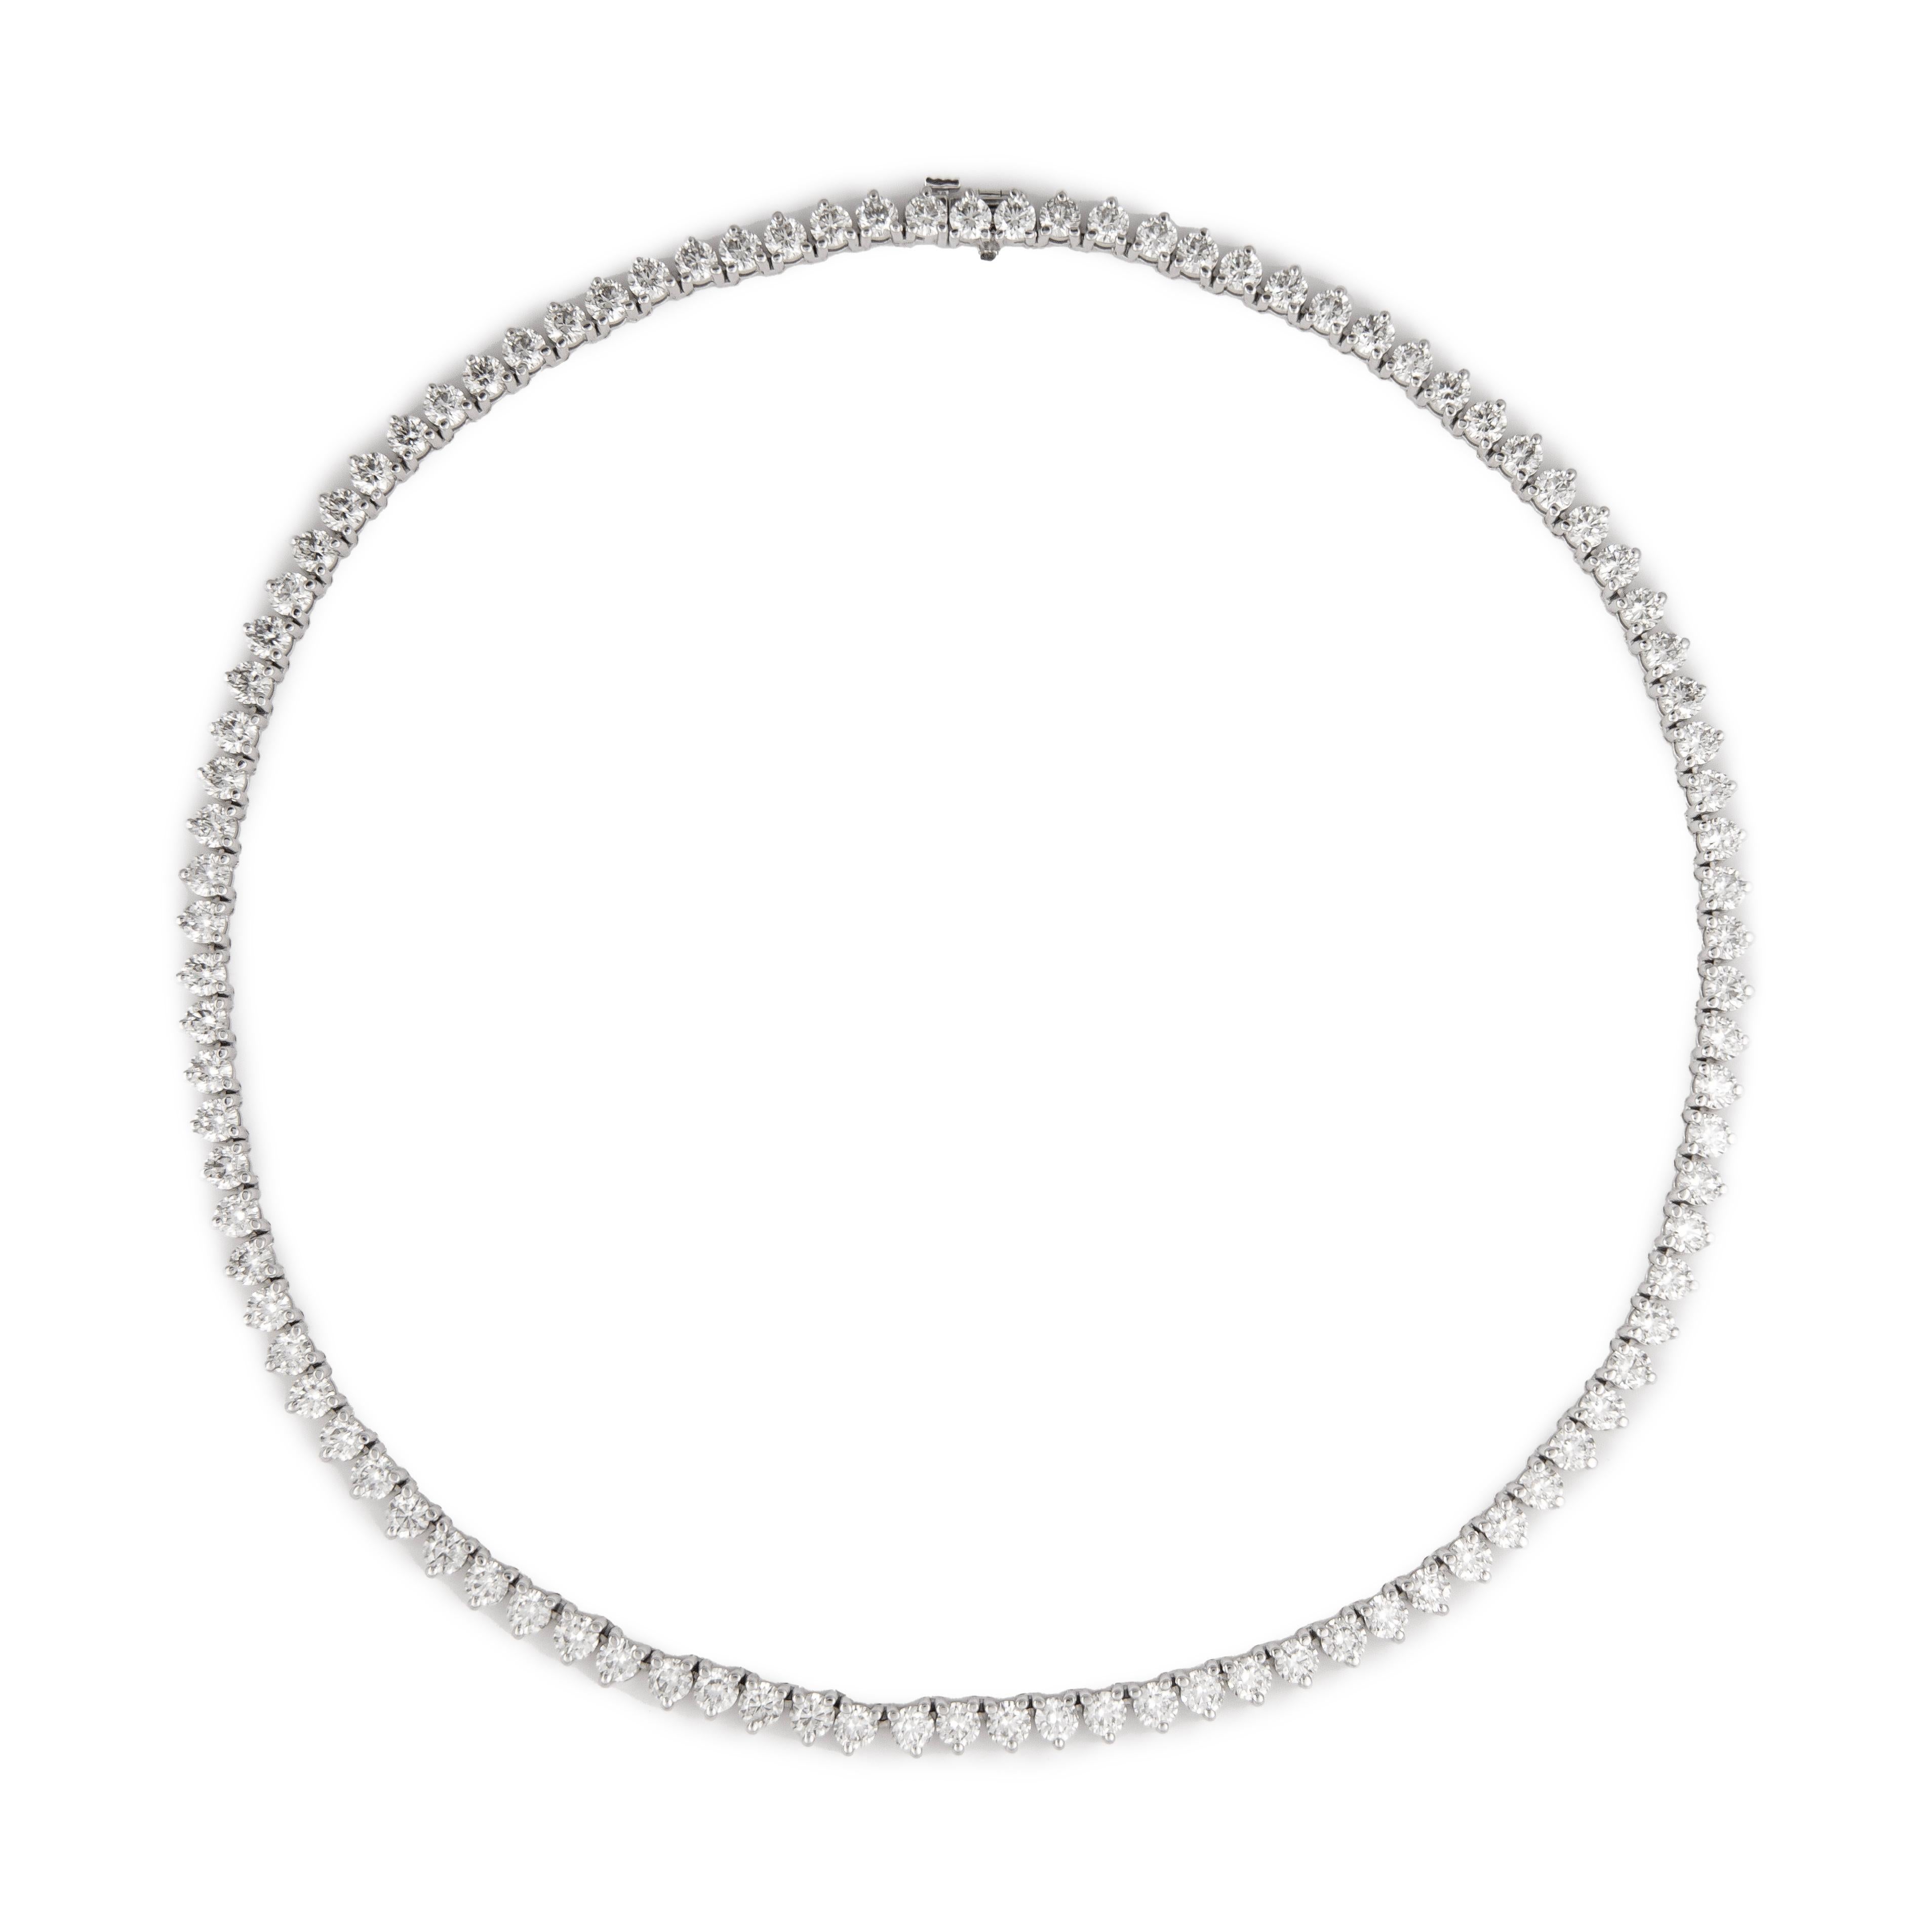 Beautiful and classic diamond tennis riviera necklace, by Alexander Beverly Hills.
20.09 carats of round brilliant diamonds, approximately H/I color and VS2/SI1 clarity. Three prong, 18k white gold, 37.27 grams, 16In.
Accommodated with an up-to-date